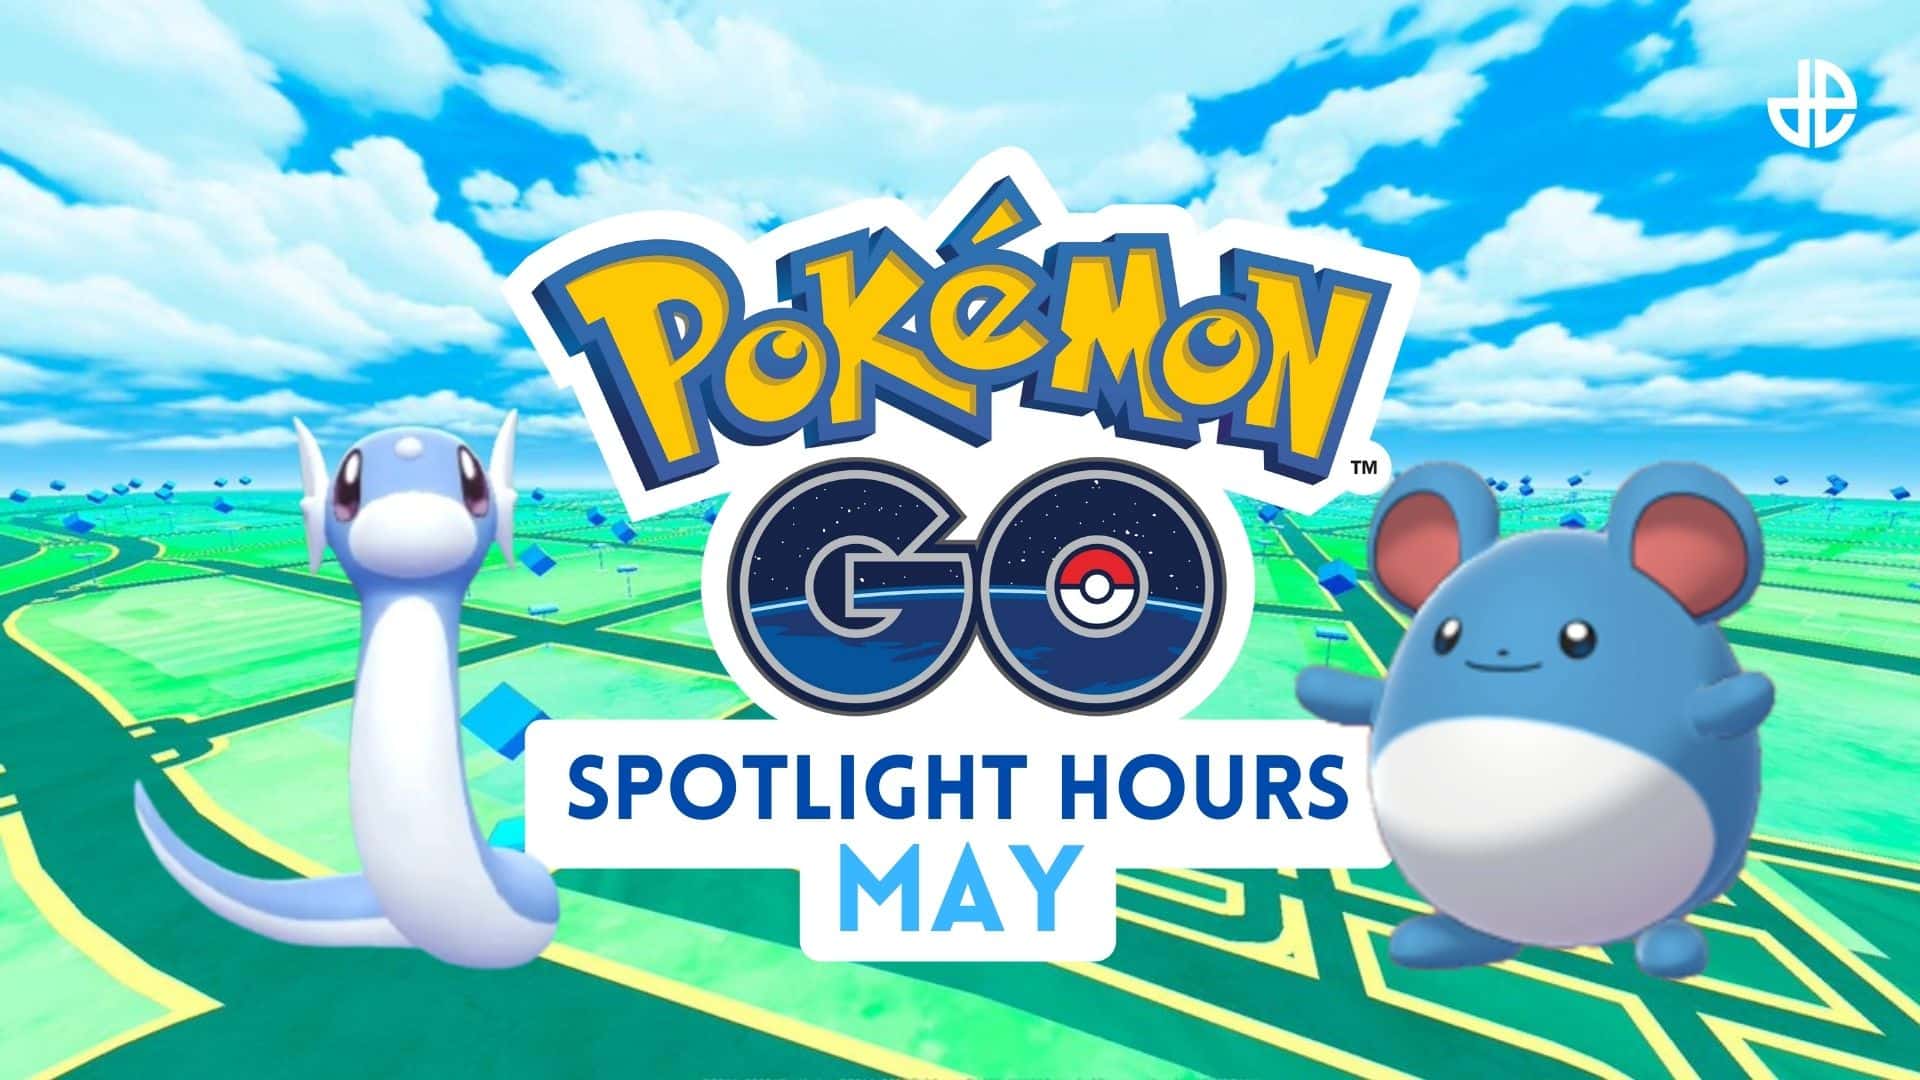 This week in Pokémon GO: 24th May to 30th May 2021